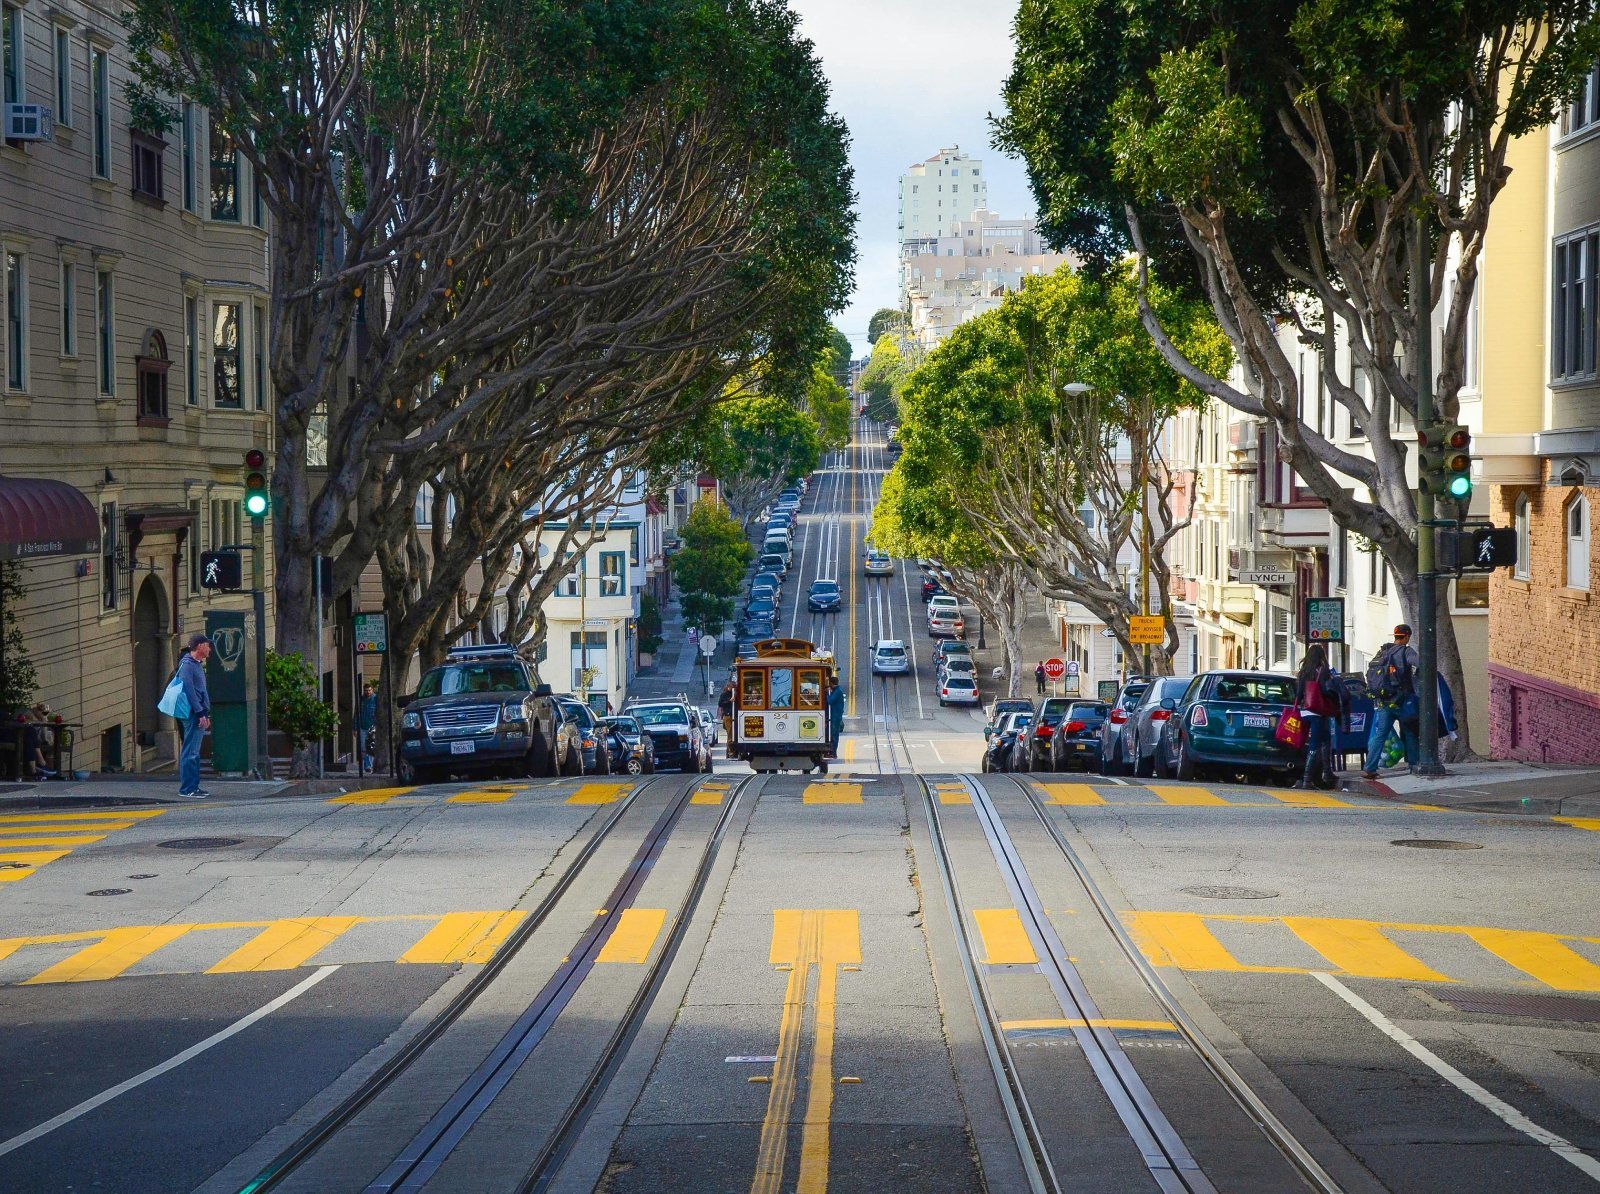 Image Credit: Pexels / Pixabay <p><span>San Francisco is often hailed as the LGBTQ+ capital of the world, thanks to its pioneering role in the rights movement and its vibrant community. The Castro district, in particular, is a beacon of LGBTQ+ culture, with rainbow flags adorning many buildings, numerous LGBTQ+ bars, shops, and cultural institutions. The city’s history is rich with milestones, including the election of Harvey Milk, one of the first openly gay elected officials in the U.S. San Francisco also hosts one of the largest and most renowned Pride celebrations globally, drawing visitors from all corners of the earth.</span></p> <p><b>Insider’s Tip:</b><span> Beyond the Castro, explore the lesser-known but equally welcoming neighborhoods like the Mission and Hayes Valley for LGBTQ+ friendly cafes, bookshops, and art spaces.</span></p> <p><b>When to Travel:</b><span> Late June, during Pride Month, is an electric time to visit, but September’s Folsom Street Fair offers a unique glimpse into the diverse LGBTQ+ culture of the city.</span></p> <p><b>How to Get There:</b><span> San Francisco International Airport serves as a major gateway, with the city’s extensive public transportation network making it easy to navigate without a car.</span></p>